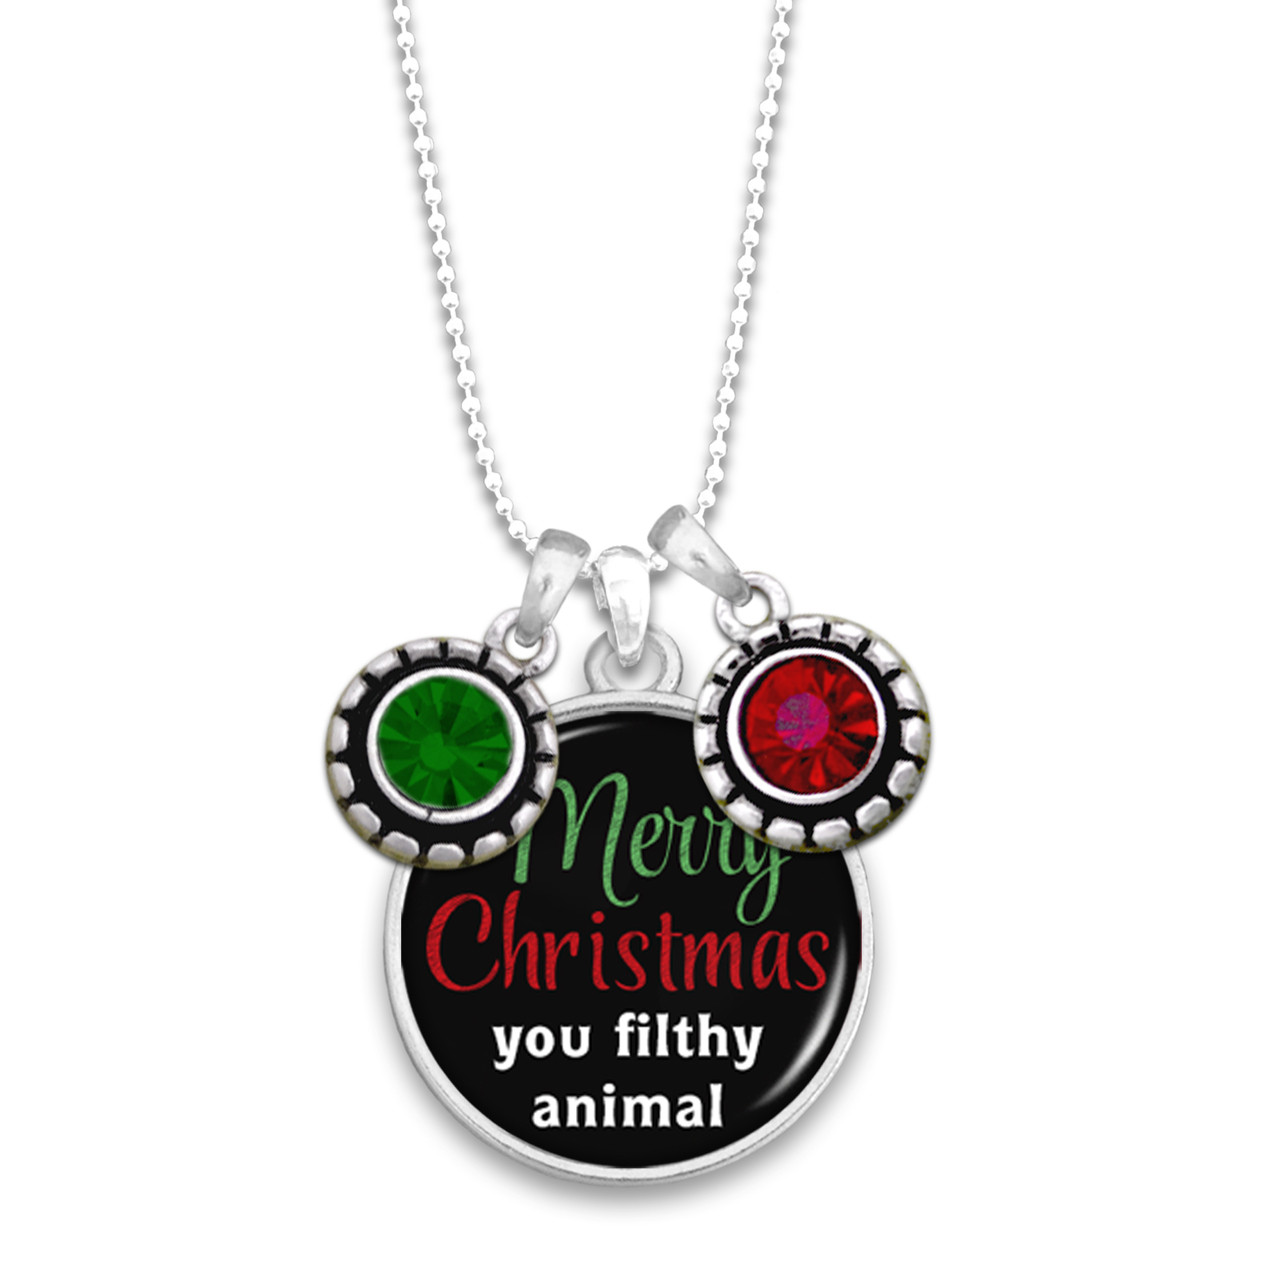 Merry Christmas You Filthy Animal Necklace